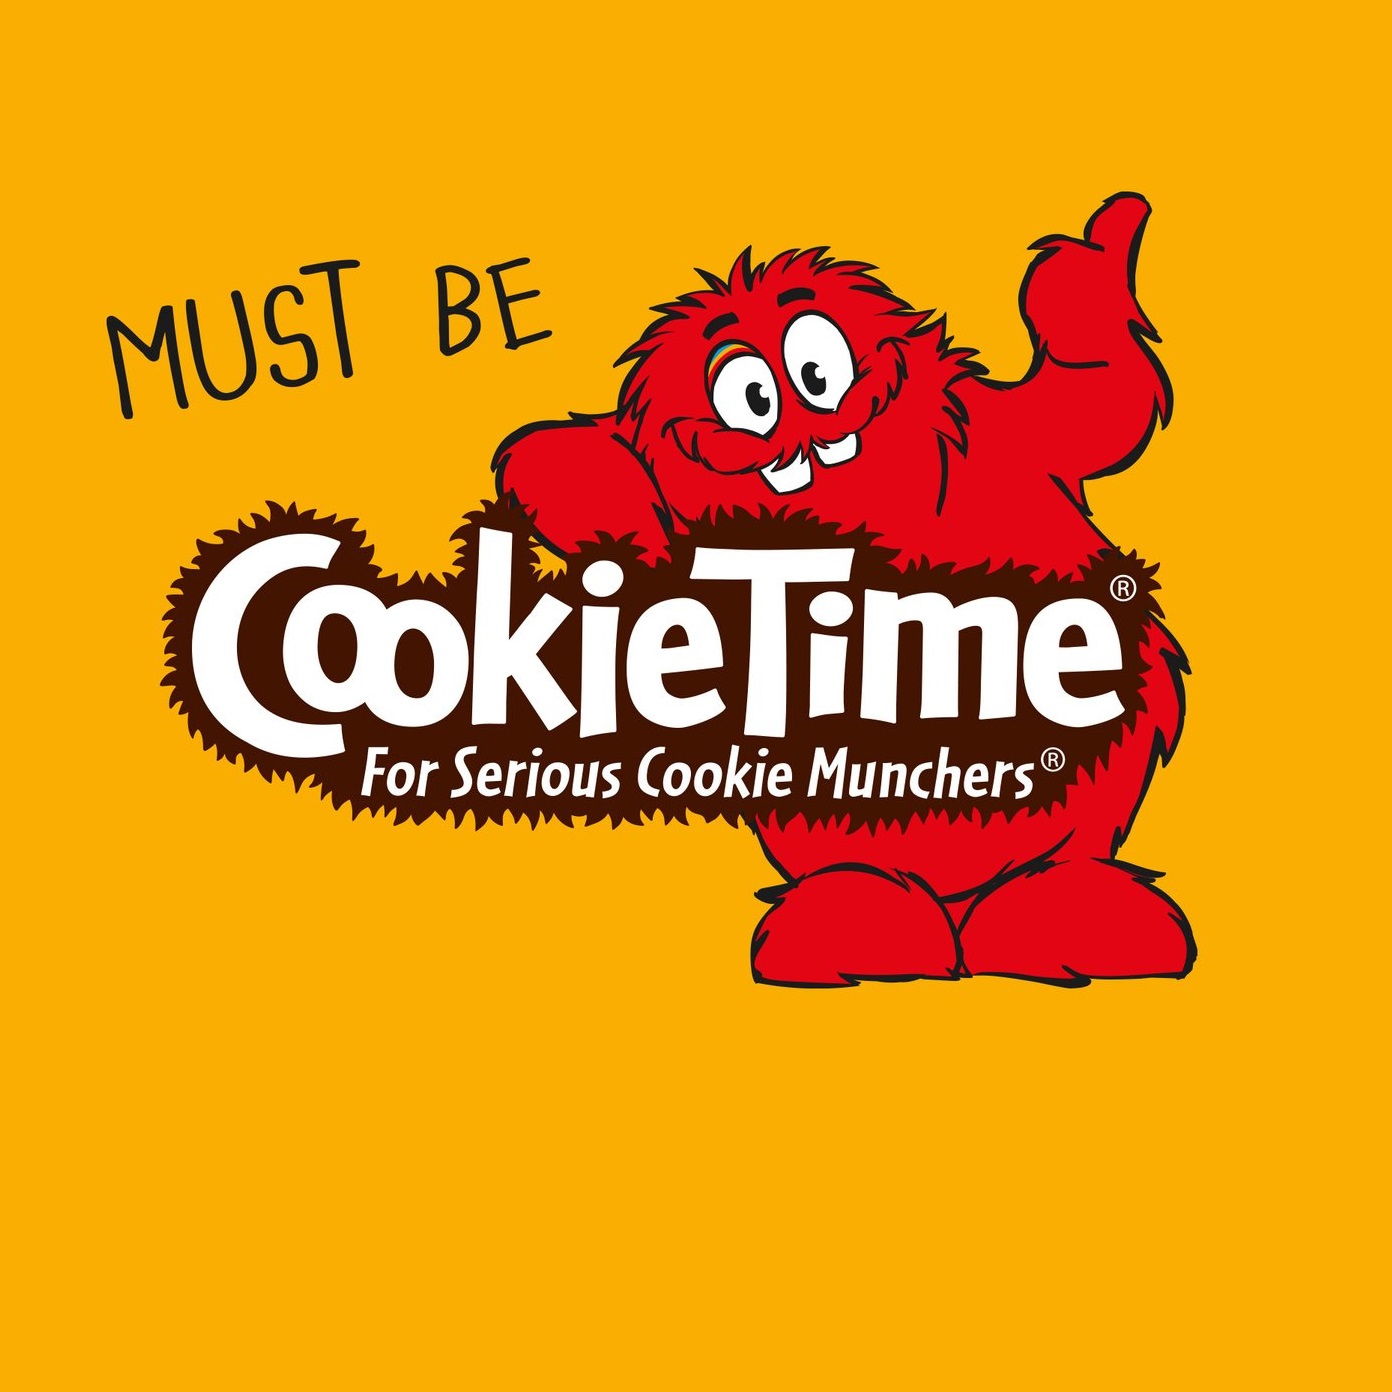 Free Shipping at Cookie Time